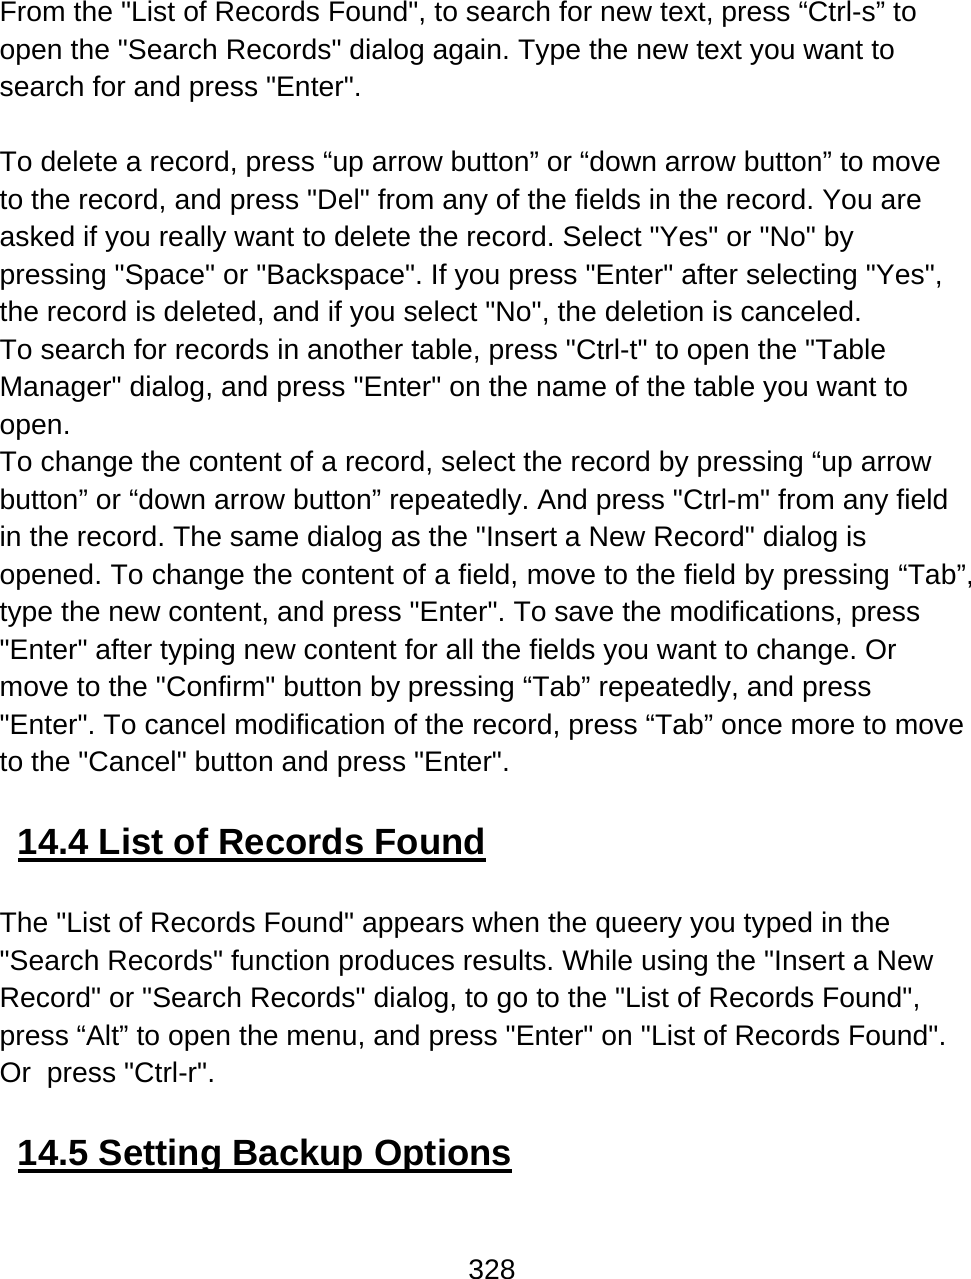 328   From the &quot;List of Records Found&quot;, to search for new text, press “Ctrl-s” to open the &quot;Search Records&quot; dialog again. Type the new text you want to search for and press &quot;Enter&quot;.  To delete a record, press “up arrow button” or “down arrow button” to move to the record, and press &quot;Del&quot; from any of the fields in the record. You are asked if you really want to delete the record. Select &quot;Yes&quot; or &quot;No&quot; by pressing &quot;Space&quot; or &quot;Backspace&quot;. If you press &quot;Enter&quot; after selecting &quot;Yes&quot;, the record is deleted, and if you select &quot;No&quot;, the deletion is canceled.  To search for records in another table, press &quot;Ctrl-t&quot; to open the &quot;Table Manager&quot; dialog, and press &quot;Enter&quot; on the name of the table you want to open. To change the content of a record, select the record by pressing “up arrow button” or “down arrow button” repeatedly. And press &quot;Ctrl-m&quot; from any field in the record. The same dialog as the &quot;Insert a New Record&quot; dialog is opened. To change the content of a field, move to the field by pressing “Tab”, type the new content, and press &quot;Enter&quot;. To save the modifications, press &quot;Enter&quot; after typing new content for all the fields you want to change. Or move to the &quot;Confirm&quot; button by pressing “Tab” repeatedly, and press &quot;Enter&quot;. To cancel modification of the record, press “Tab” once more to move to the &quot;Cancel&quot; button and press &quot;Enter&quot;.  14.4 List of Records Found  The &quot;List of Records Found&quot; appears when the queery you typed in the &quot;Search Records&quot; function produces results. While using the &quot;Insert a New Record&quot; or &quot;Search Records&quot; dialog, to go to the &quot;List of Records Found&quot;, press “Alt” to open the menu, and press &quot;Enter&quot; on &quot;List of Records Found&quot;. Or  press &quot;Ctrl-r&quot;.  14.5 Setting Backup Options  